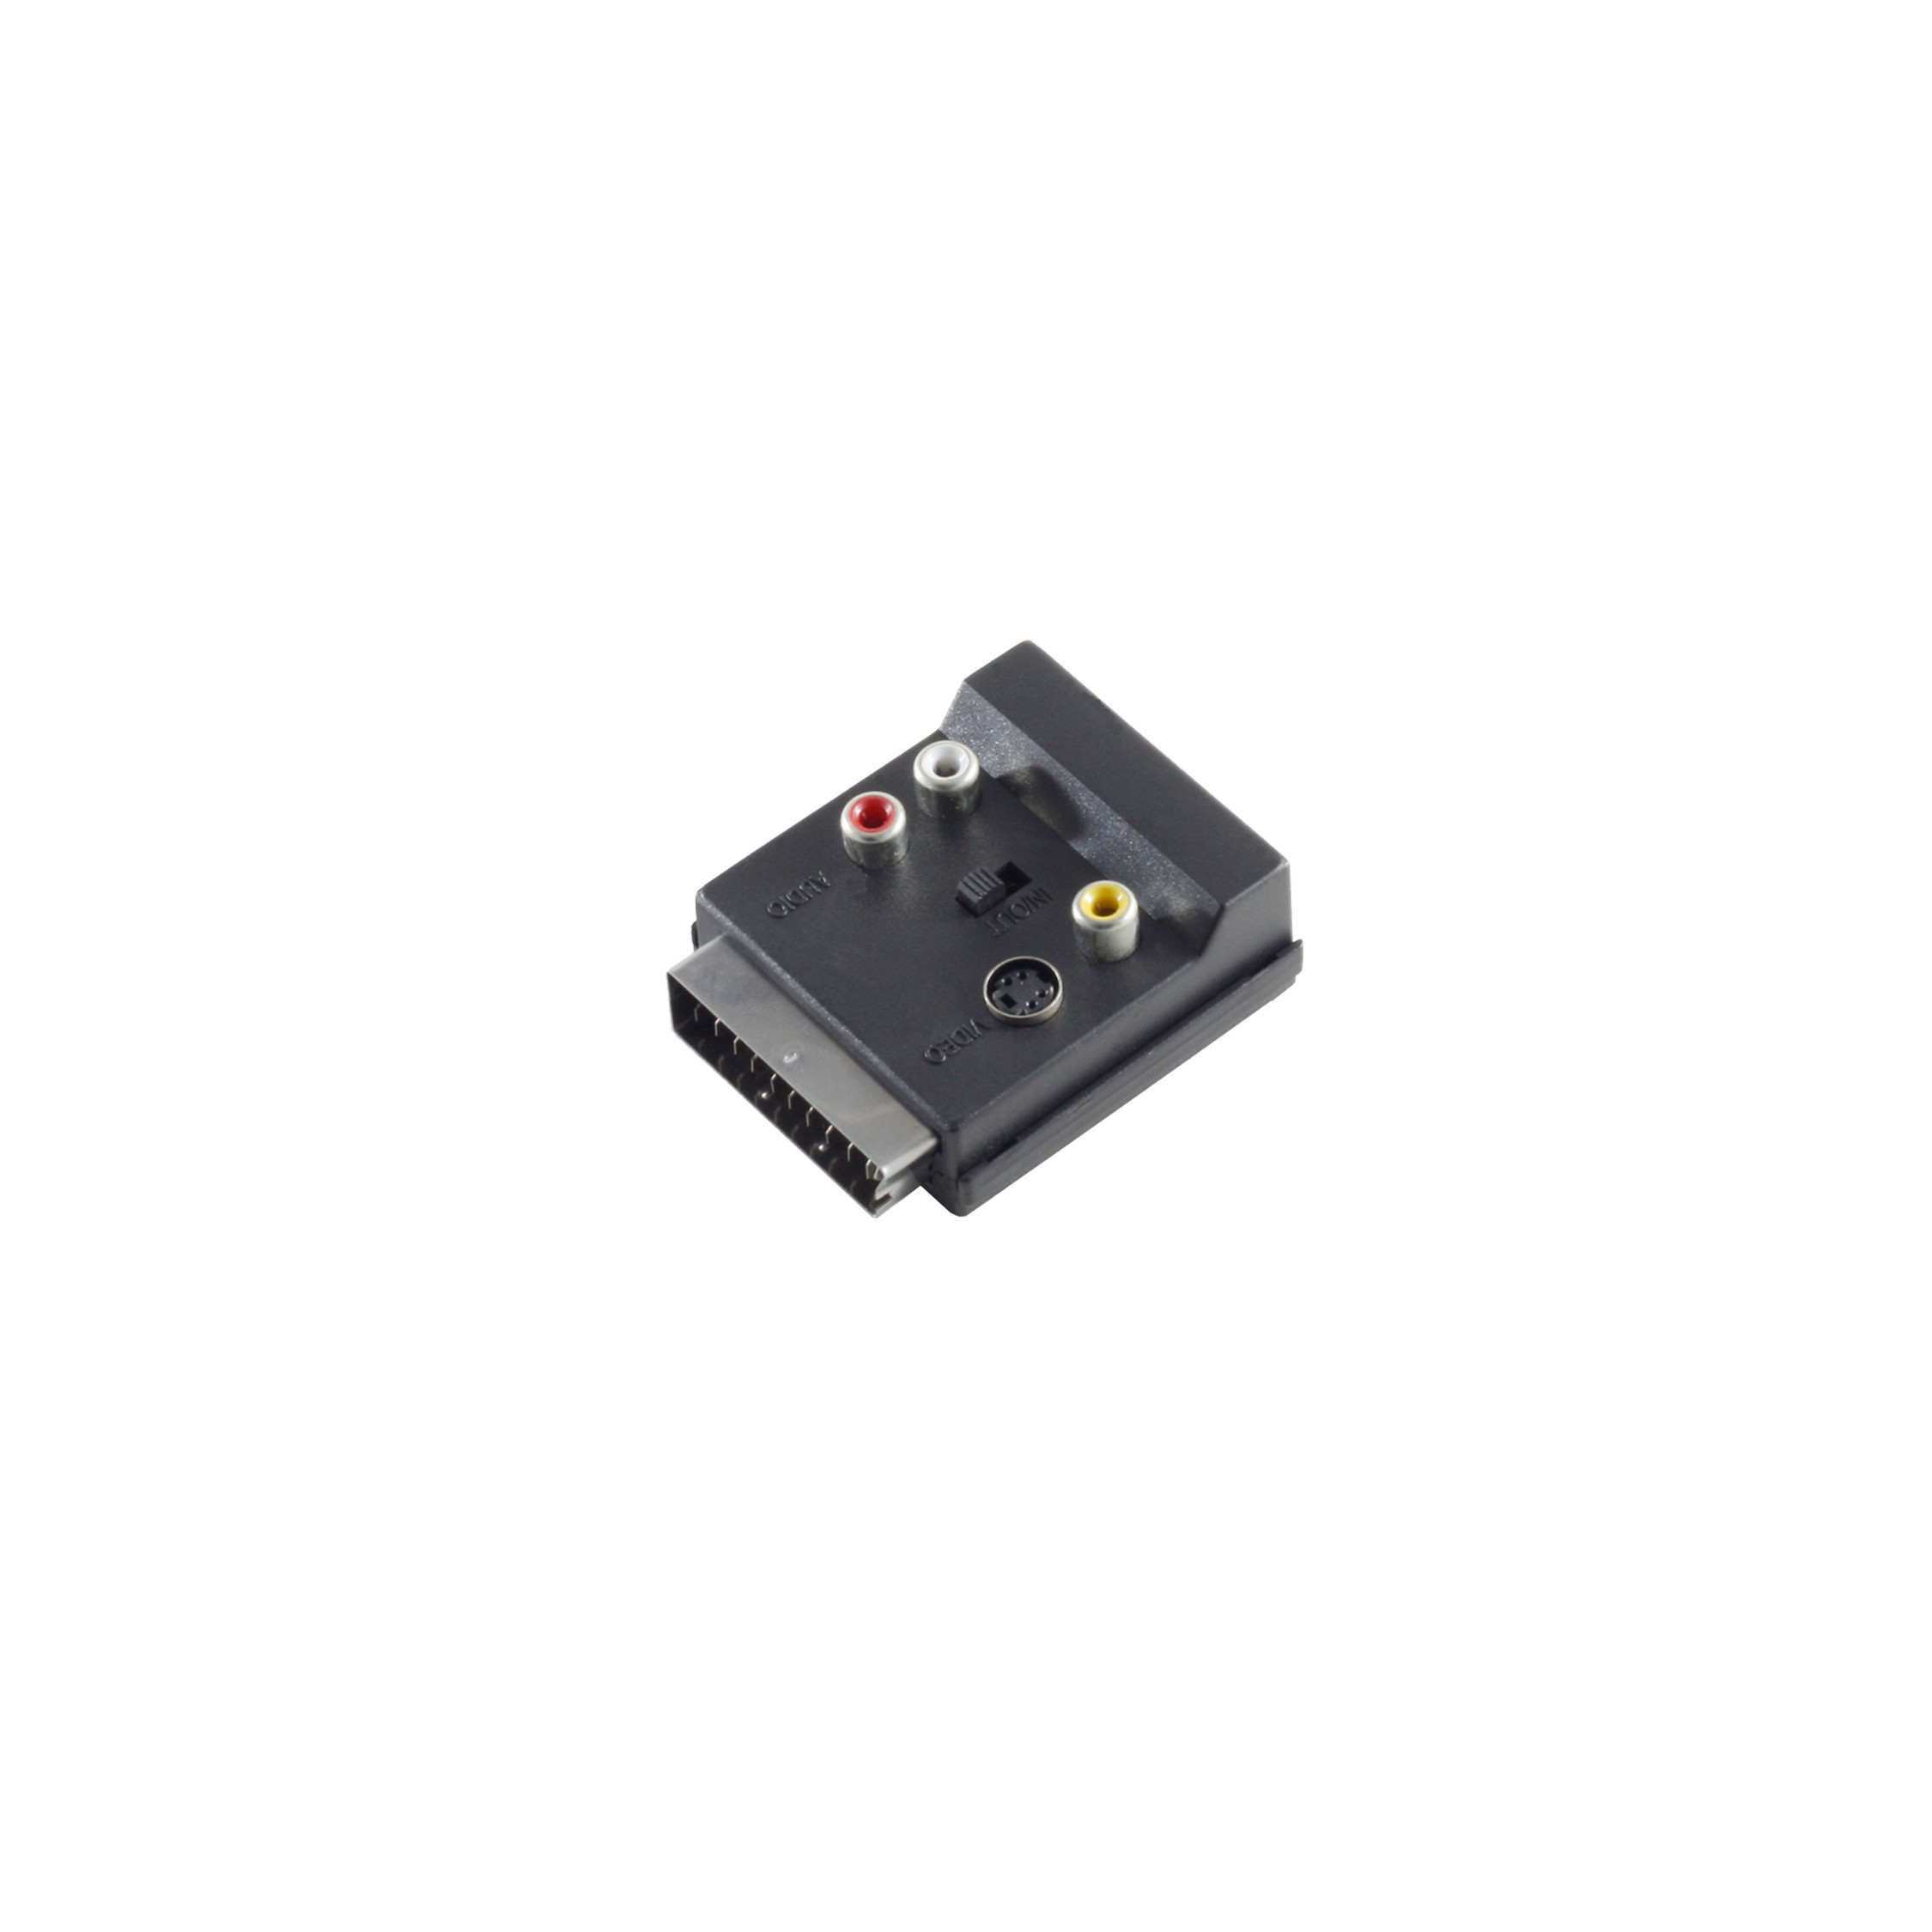 SHIVERPEAKS Scartbuchse/3Cinchbuchse/4-pol MINI Buchse Scart Adapter IN/OUT